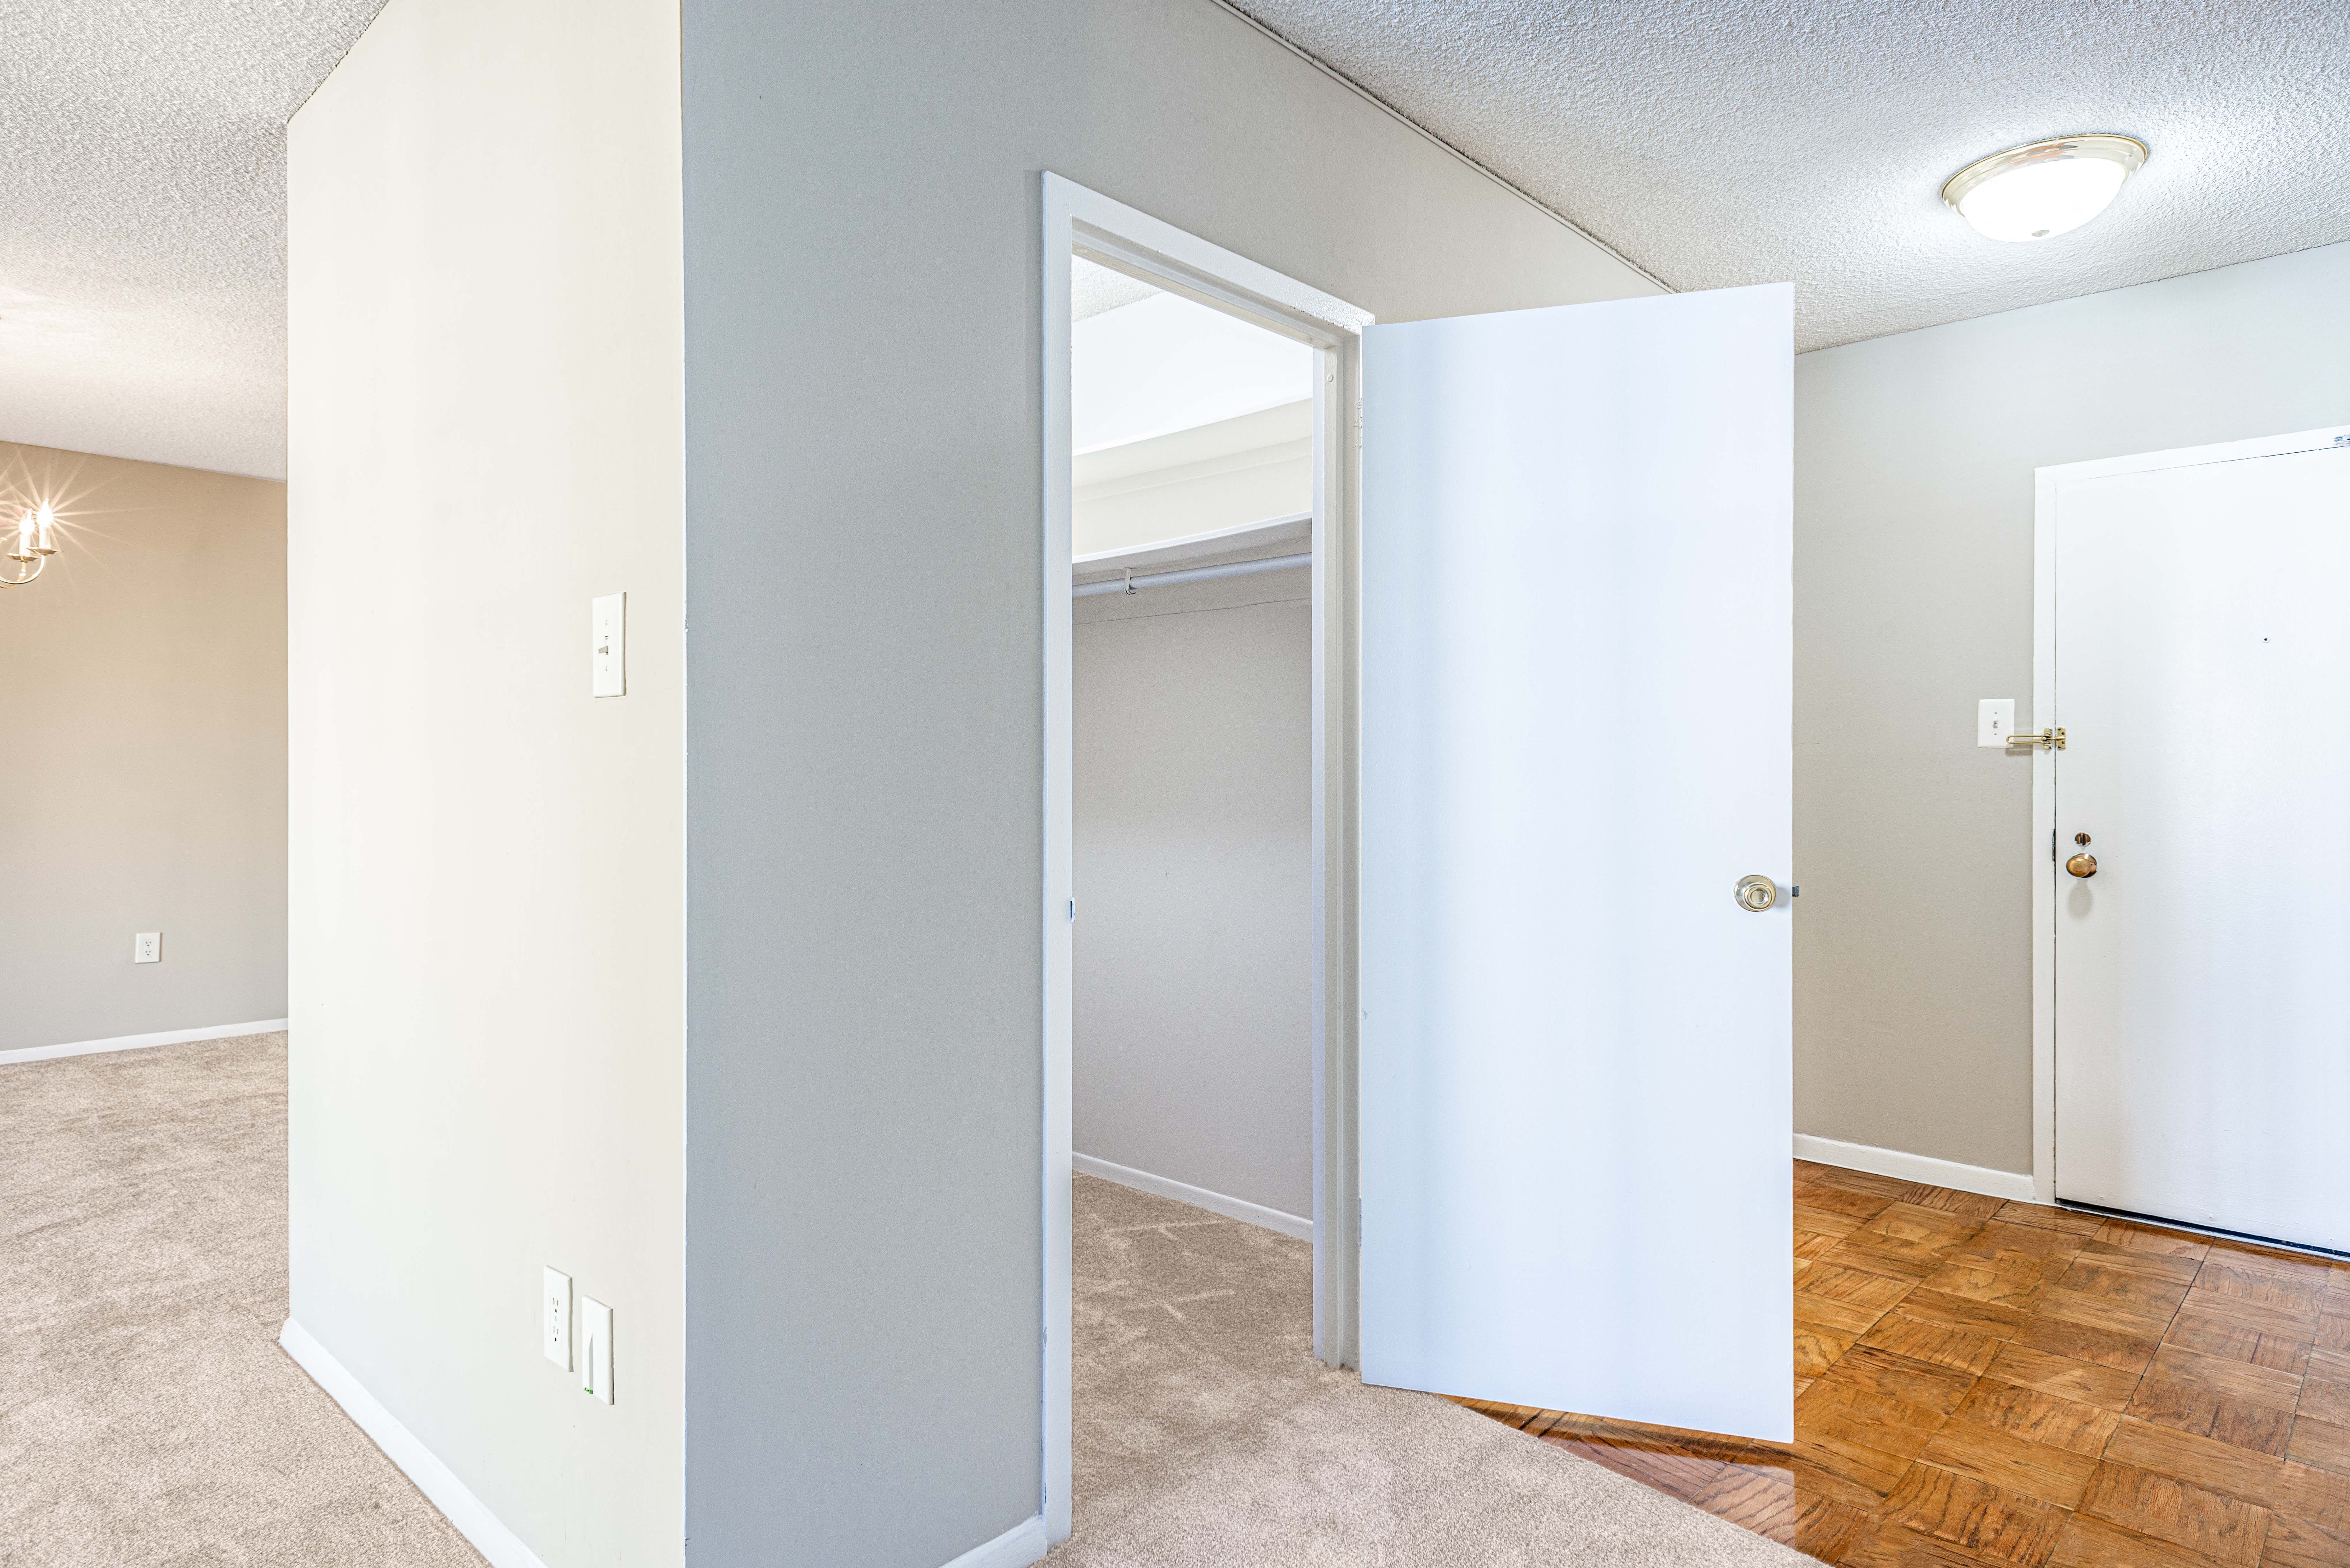 Large storage spaces throughout apartment homes